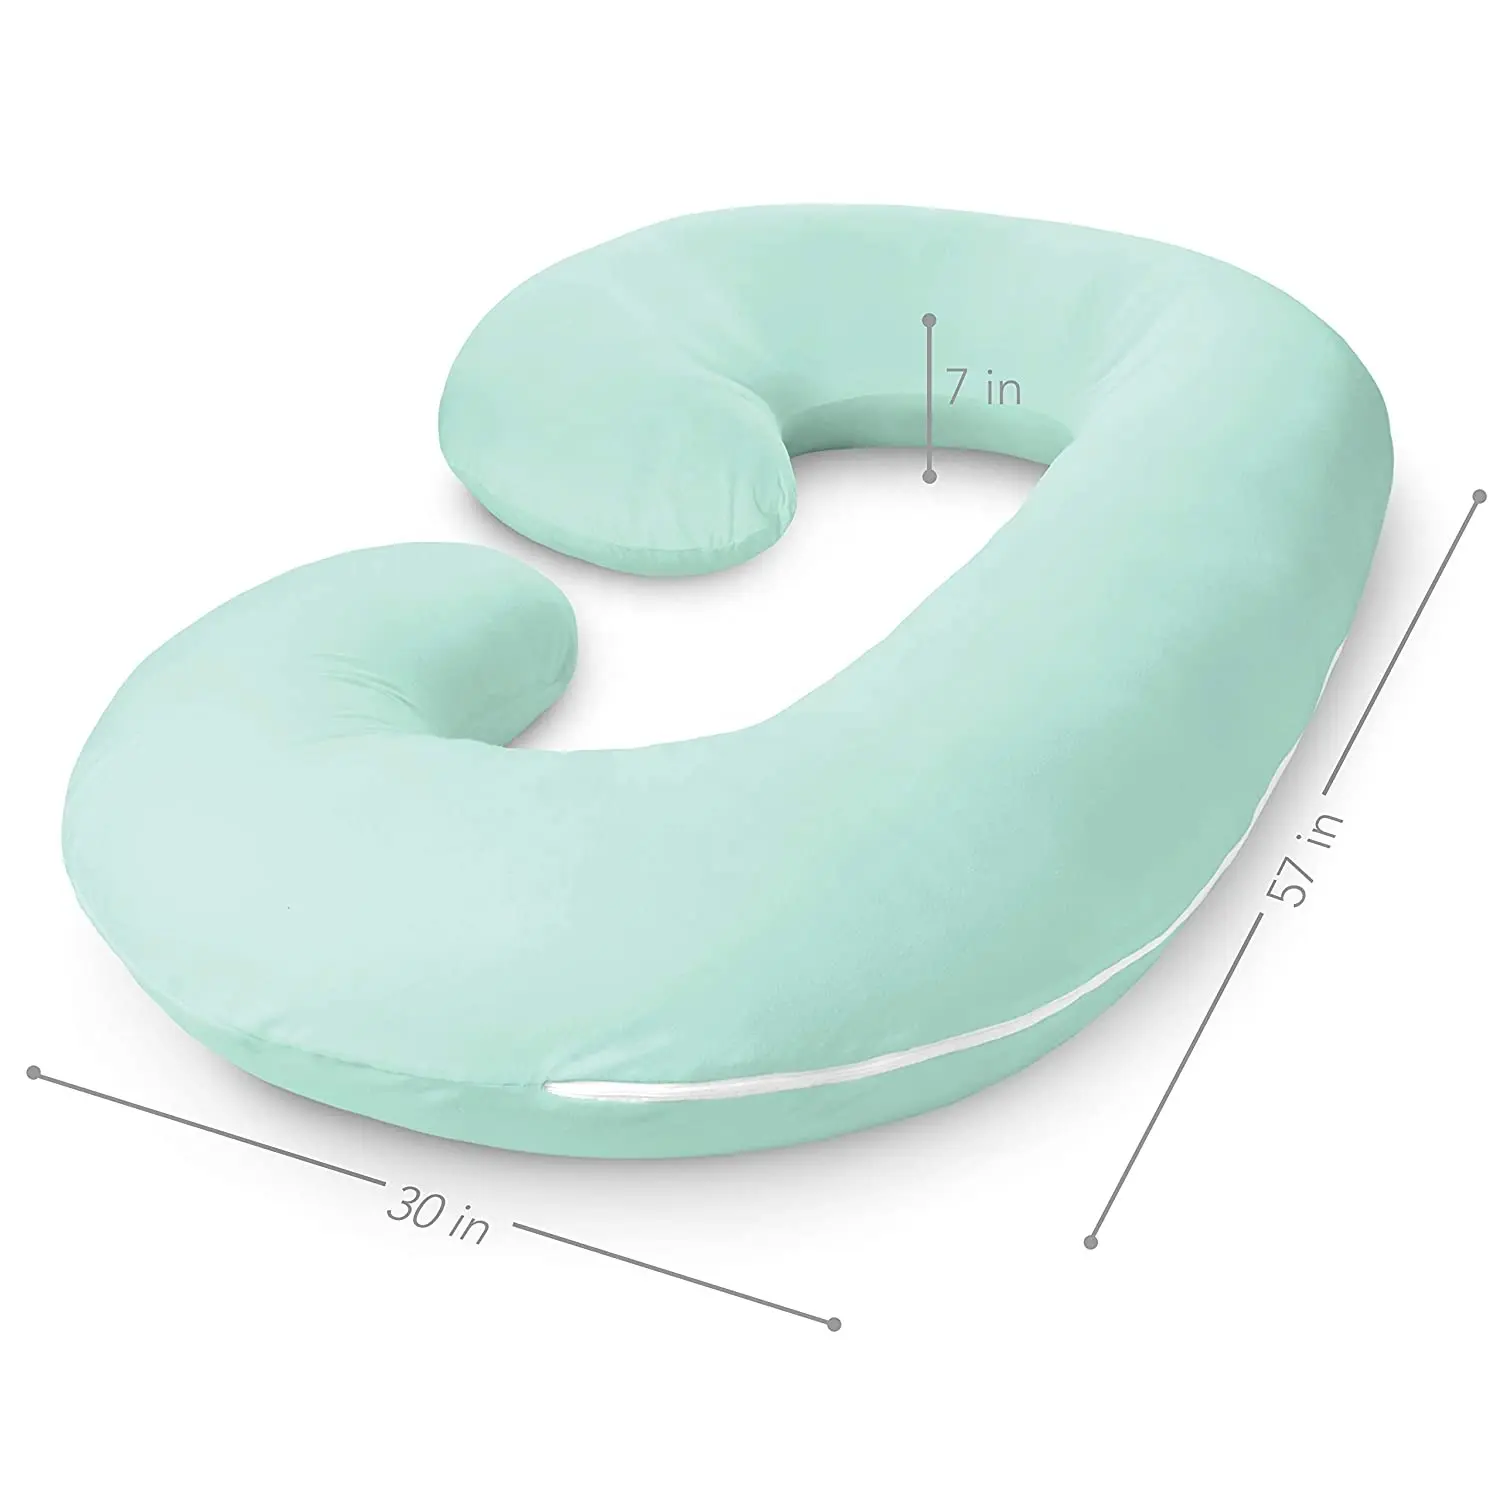 C Shaped Body Maternity Pillows With Zippered Cover Sleeping Sleepers Pregnancy Pillow Pregnant Cushion